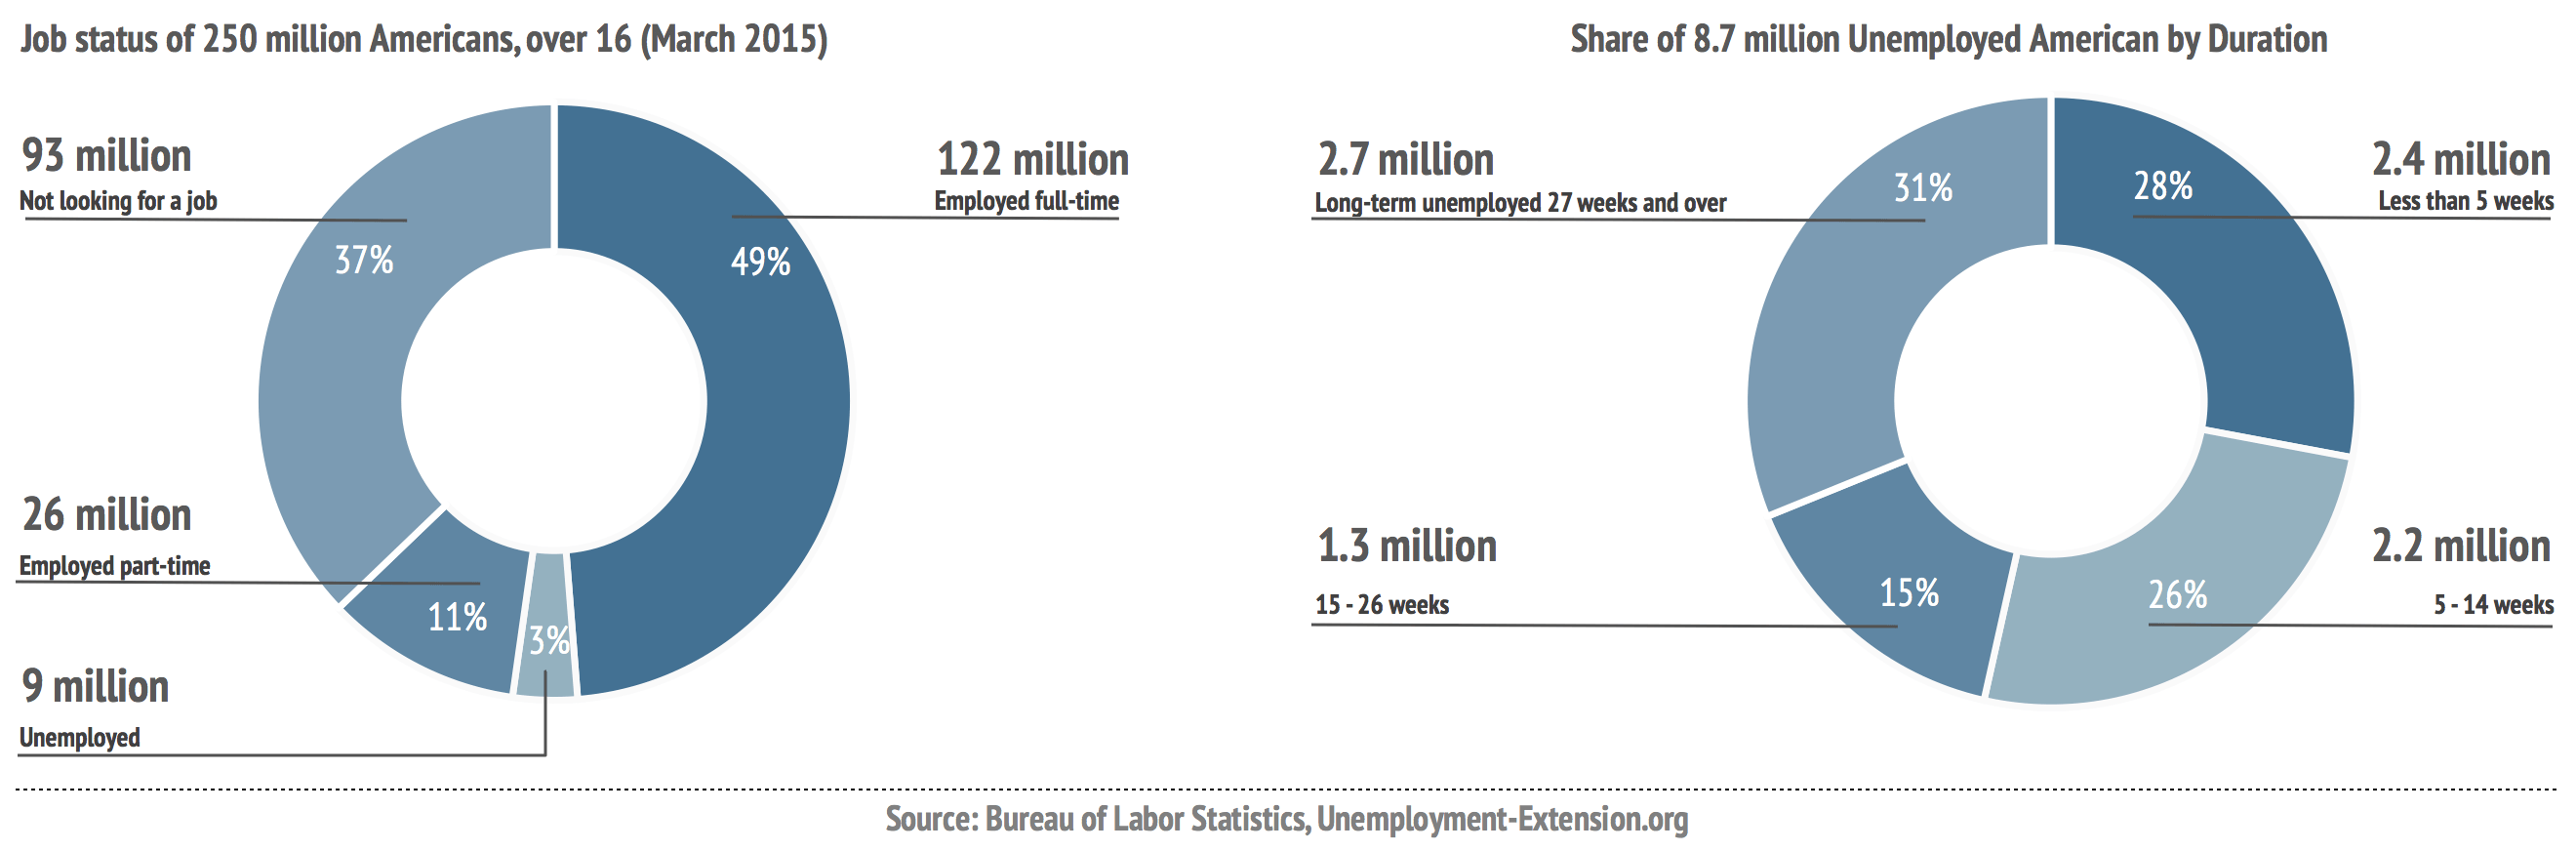 Job status of 250 million Americans, over 16, March 2015